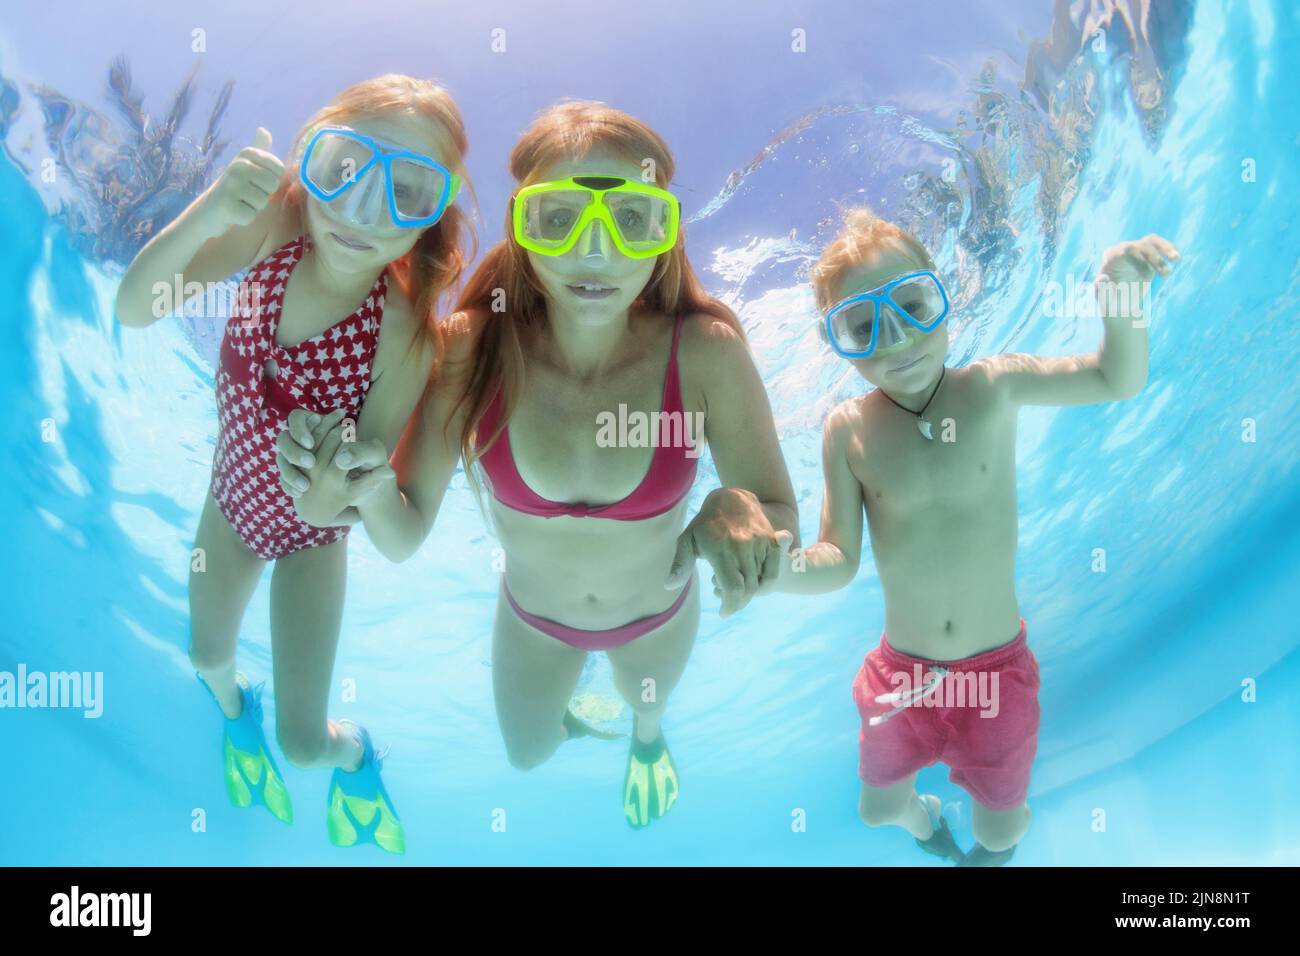 Happy people dive underwater with fun. Funny photo of mother, kids in snorkeling masks in aqua park swimming pool. Family lifestyle. Stock Photo